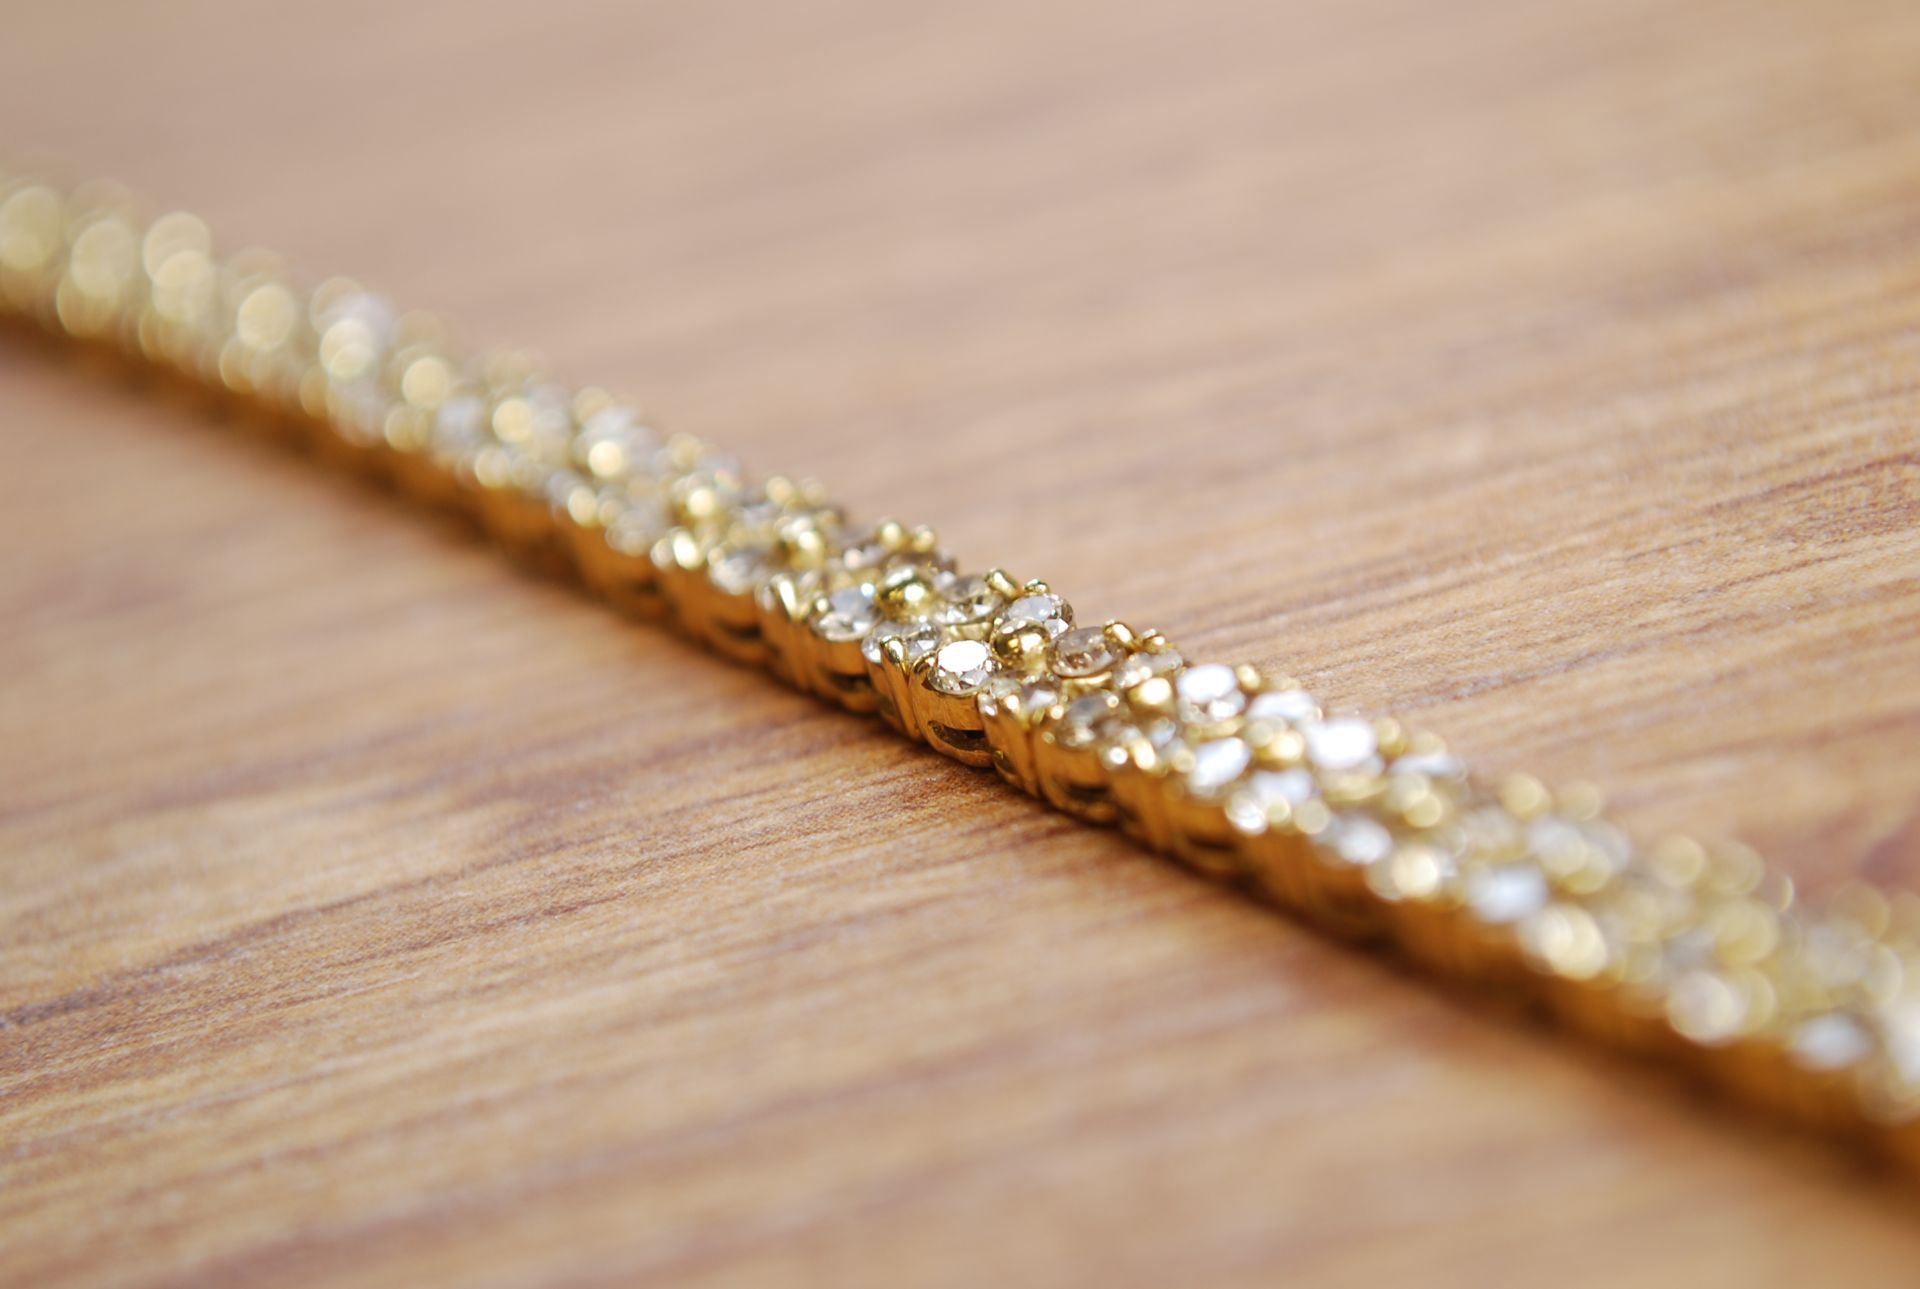 18ct GOLD 5.00ct DIAMOND TENNIS BRACELET WITH £8000 VALUATION - Image 5 of 5